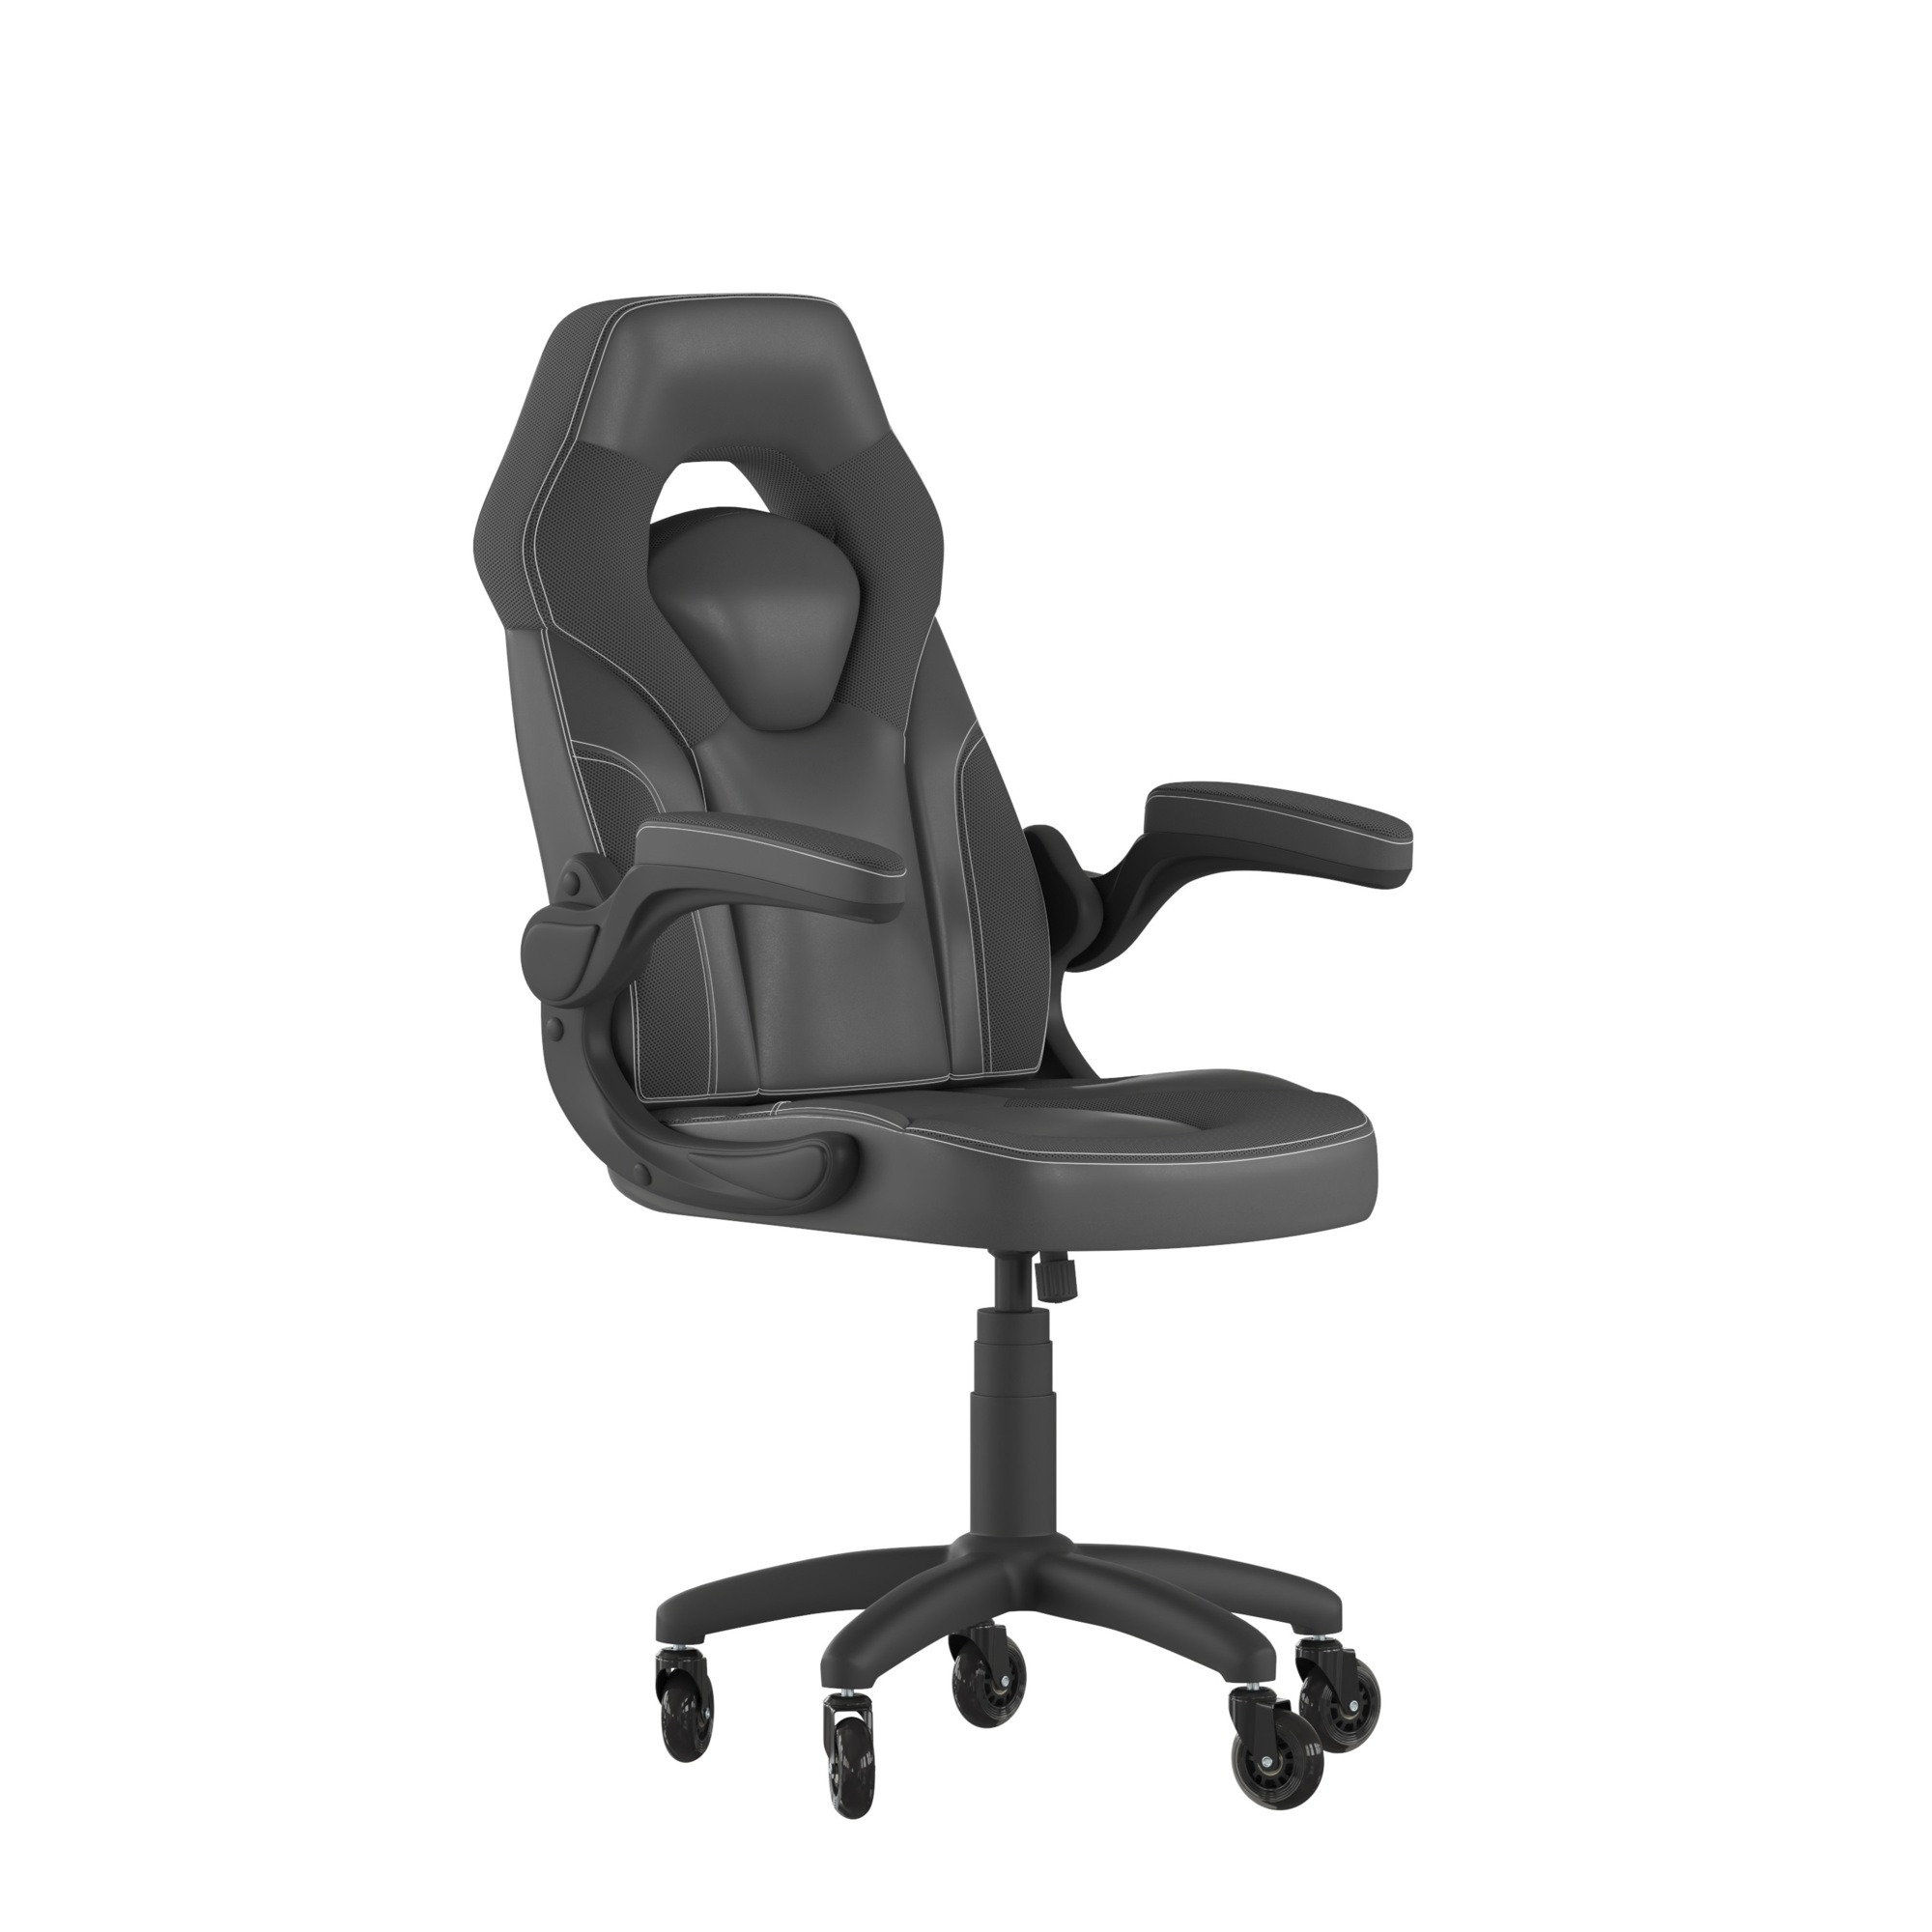 Flash Furniture, Black LeatherSoft Gaming Chair - Skate Wheels, Primary Color Black, Included (qty.) 2, Model CH00095BKRLB